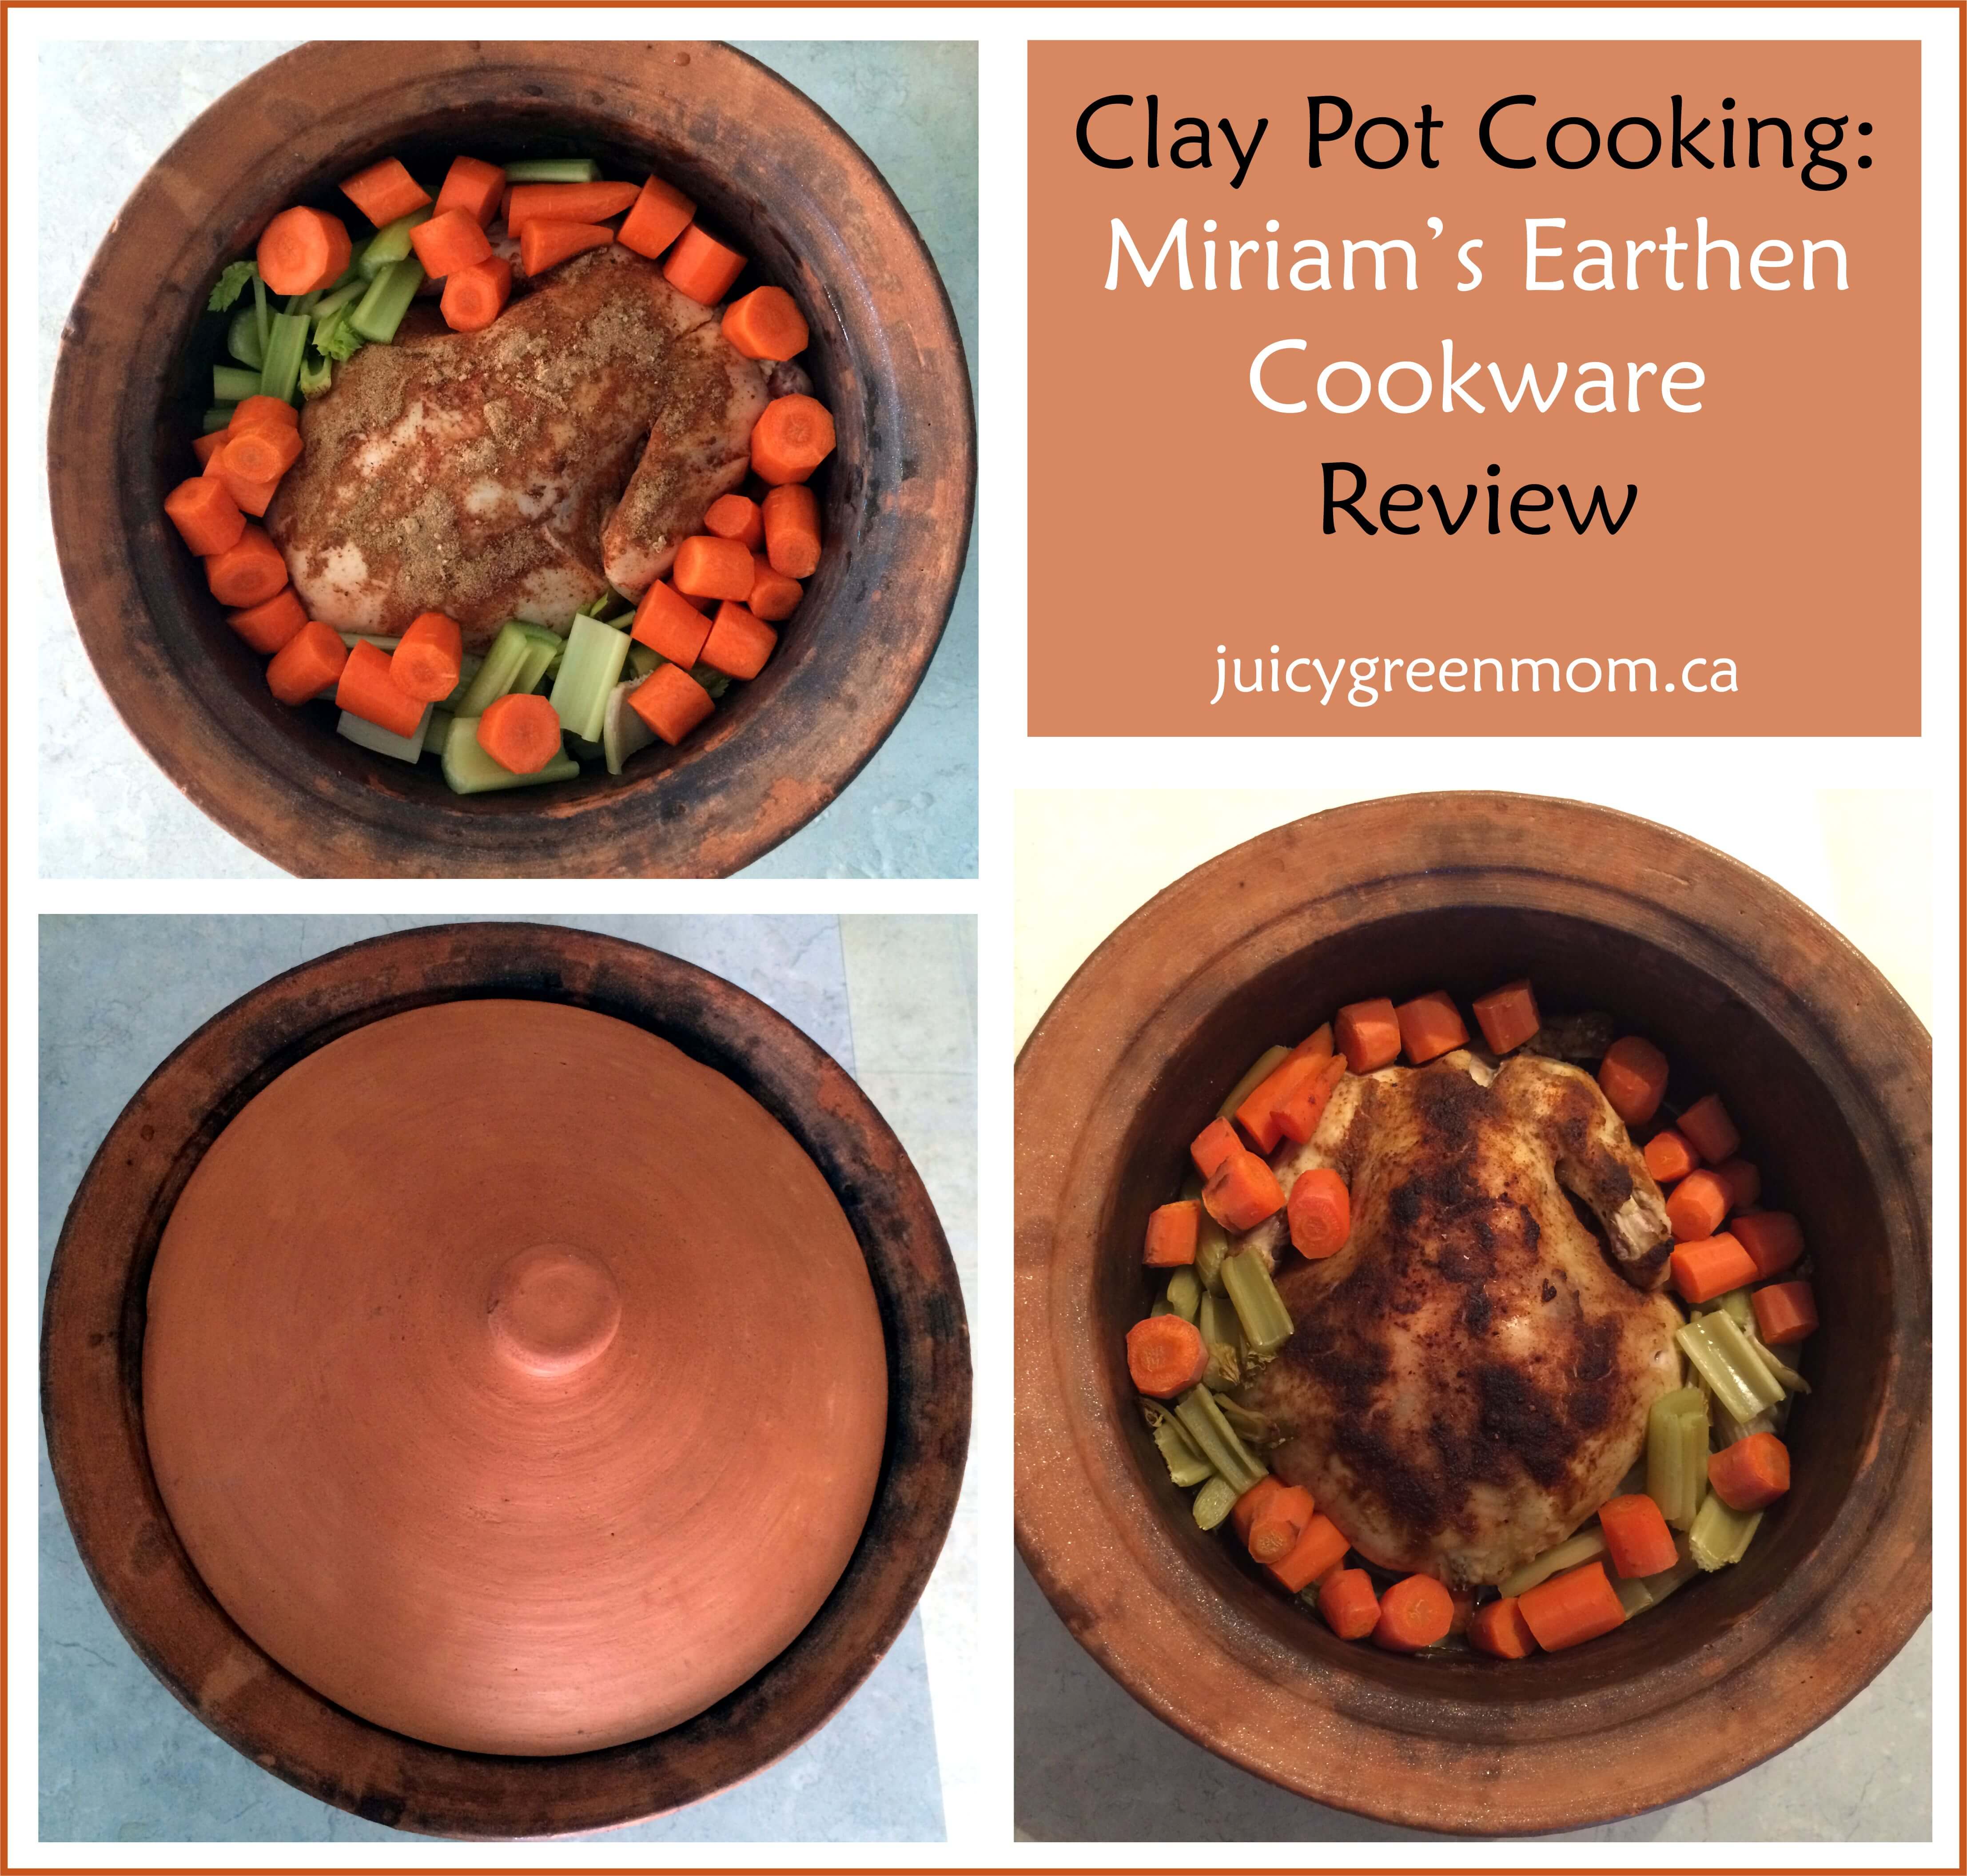 Large Clay Pot for Cooking With Lid, ECO, Glazed, Terra Cotta